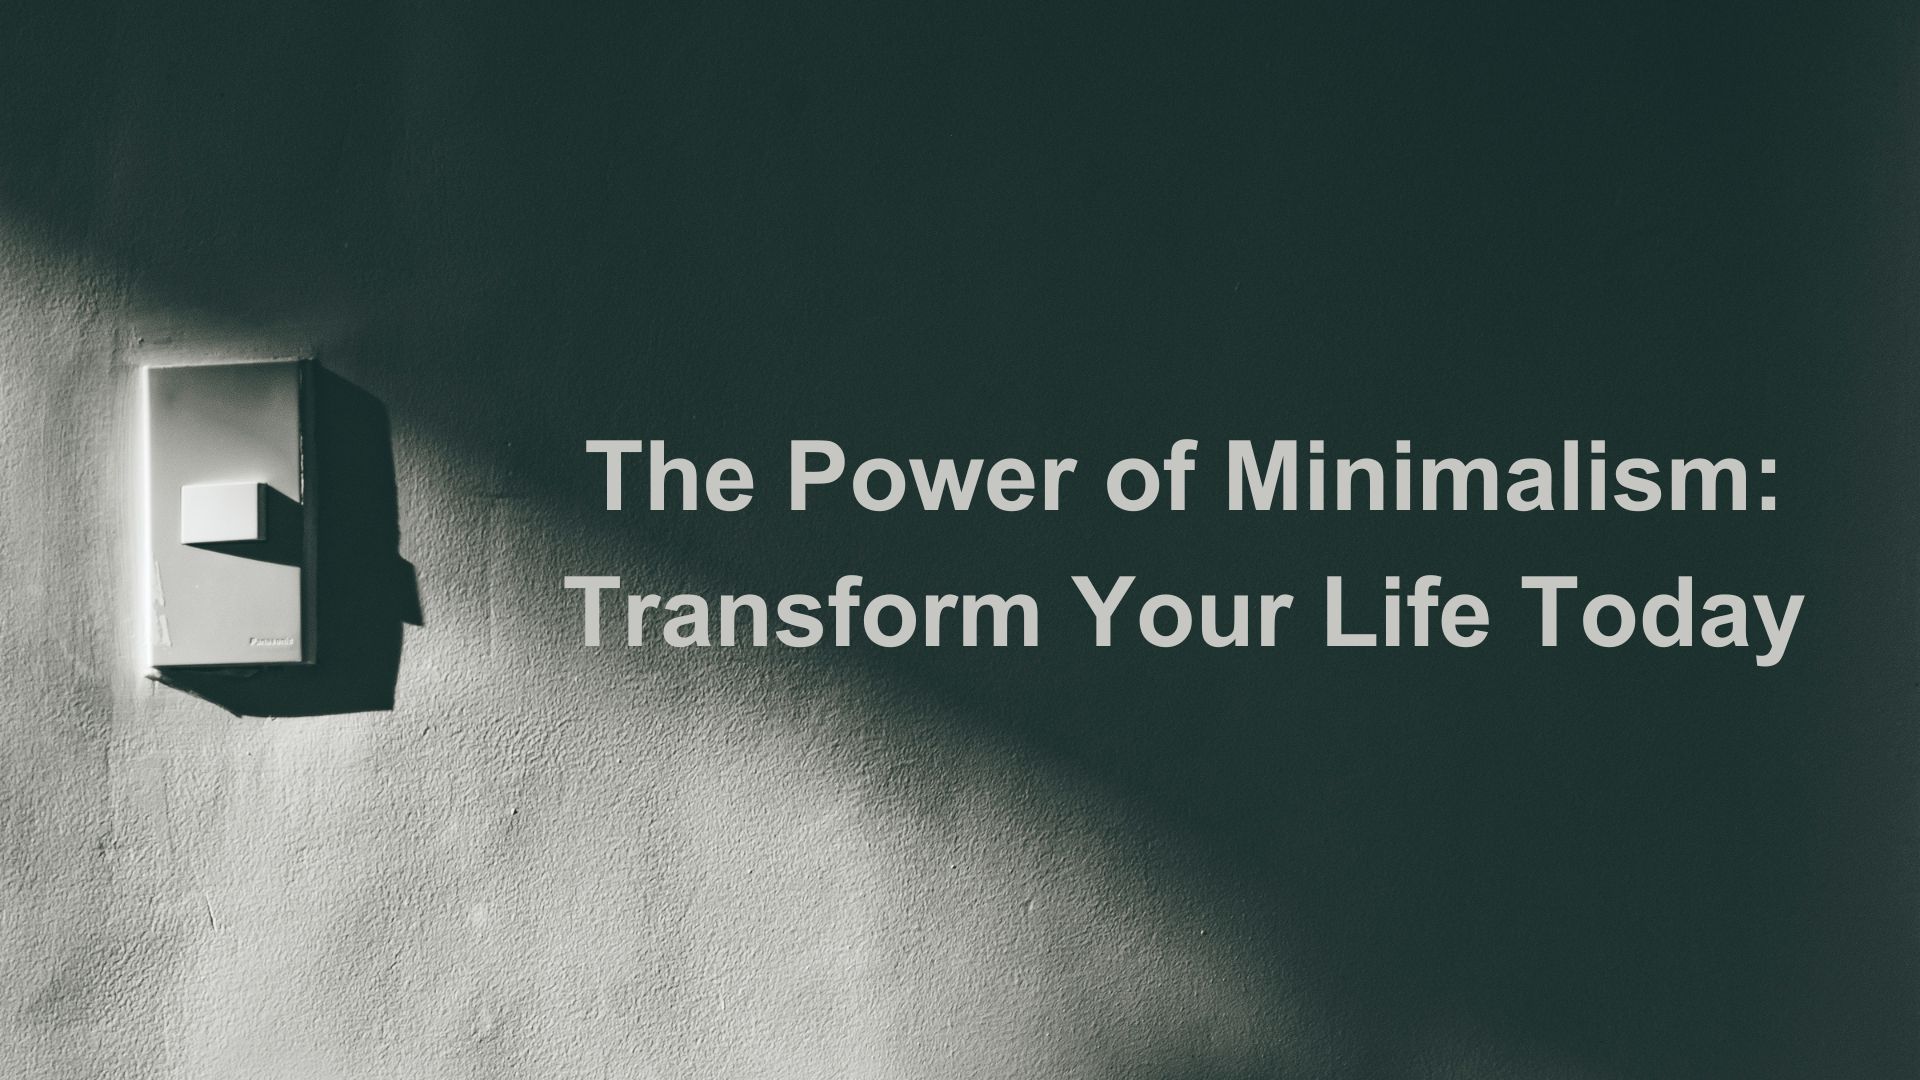 The Power of Minimalism: Transform Your Life Today